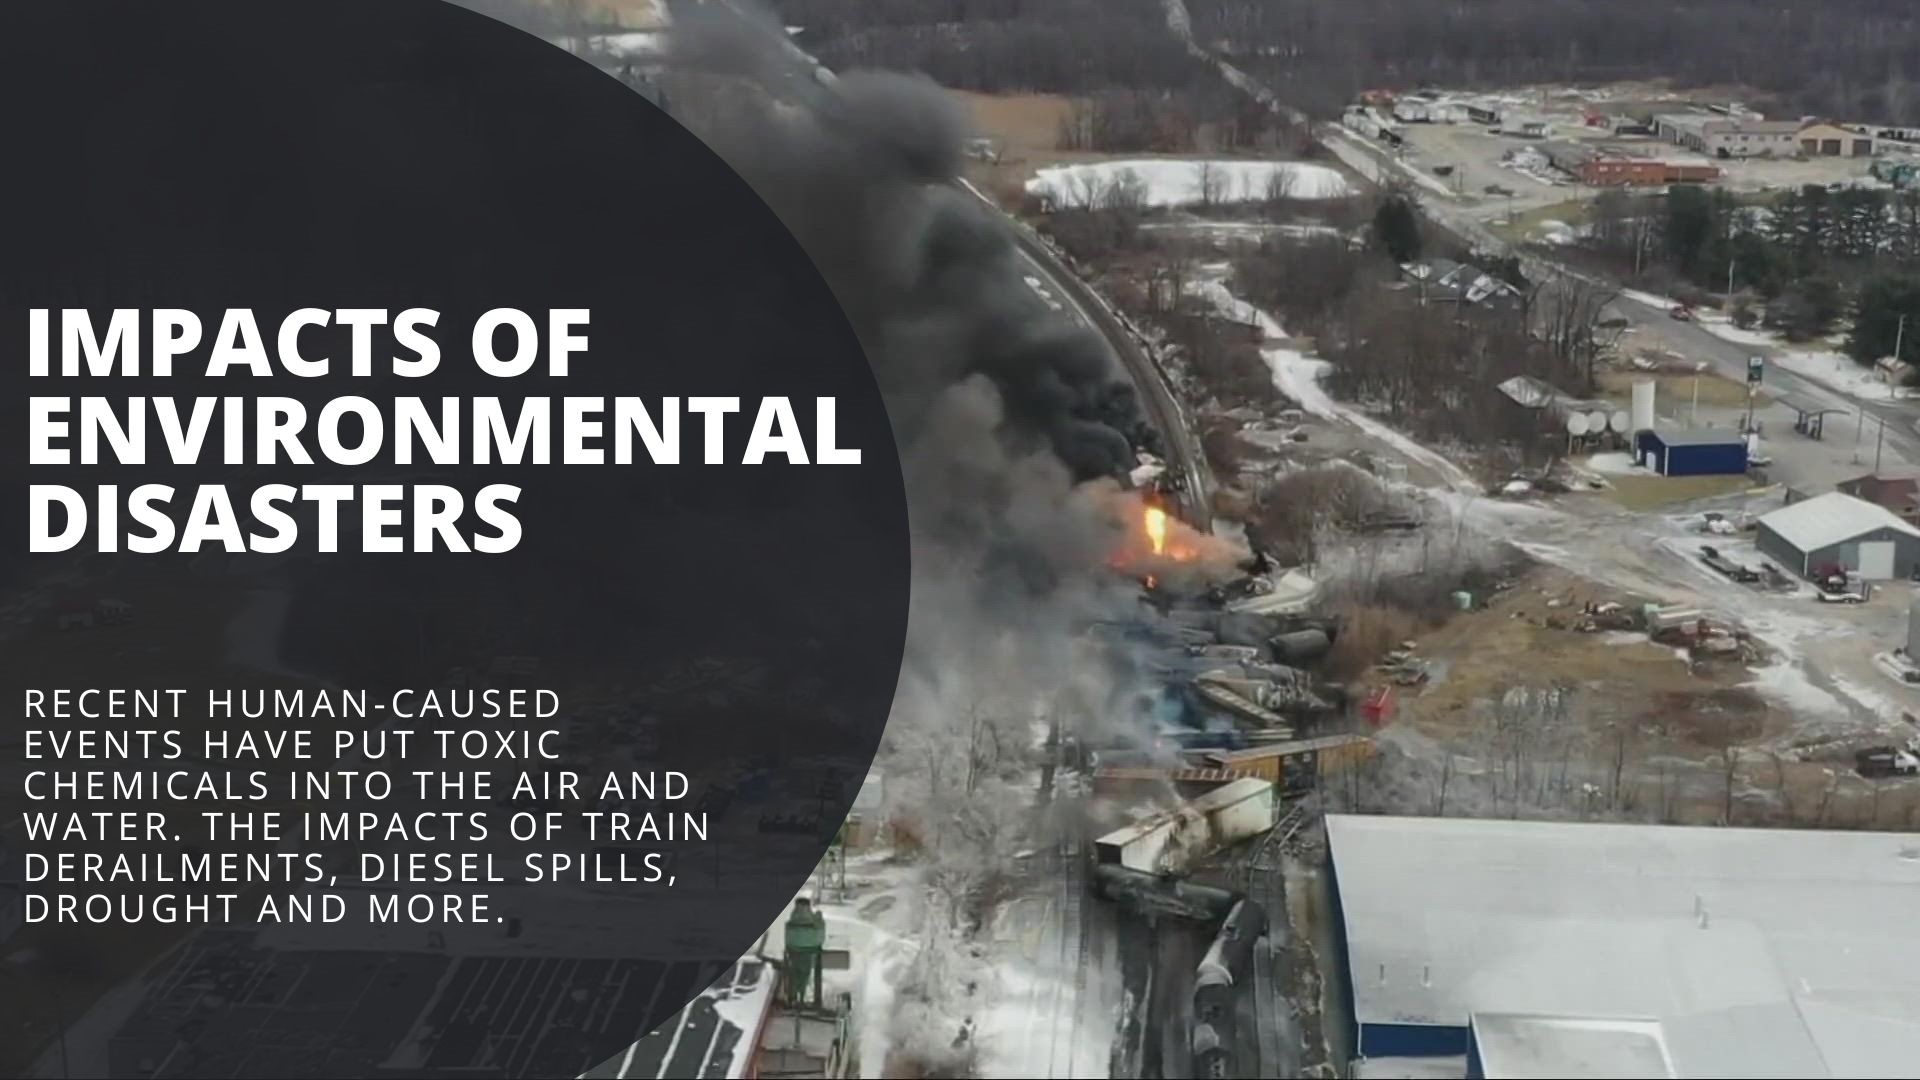 A deeper dive into how recent human-caused accidents are creating environmental disasters. From train derailments to drought and polluted waterways.